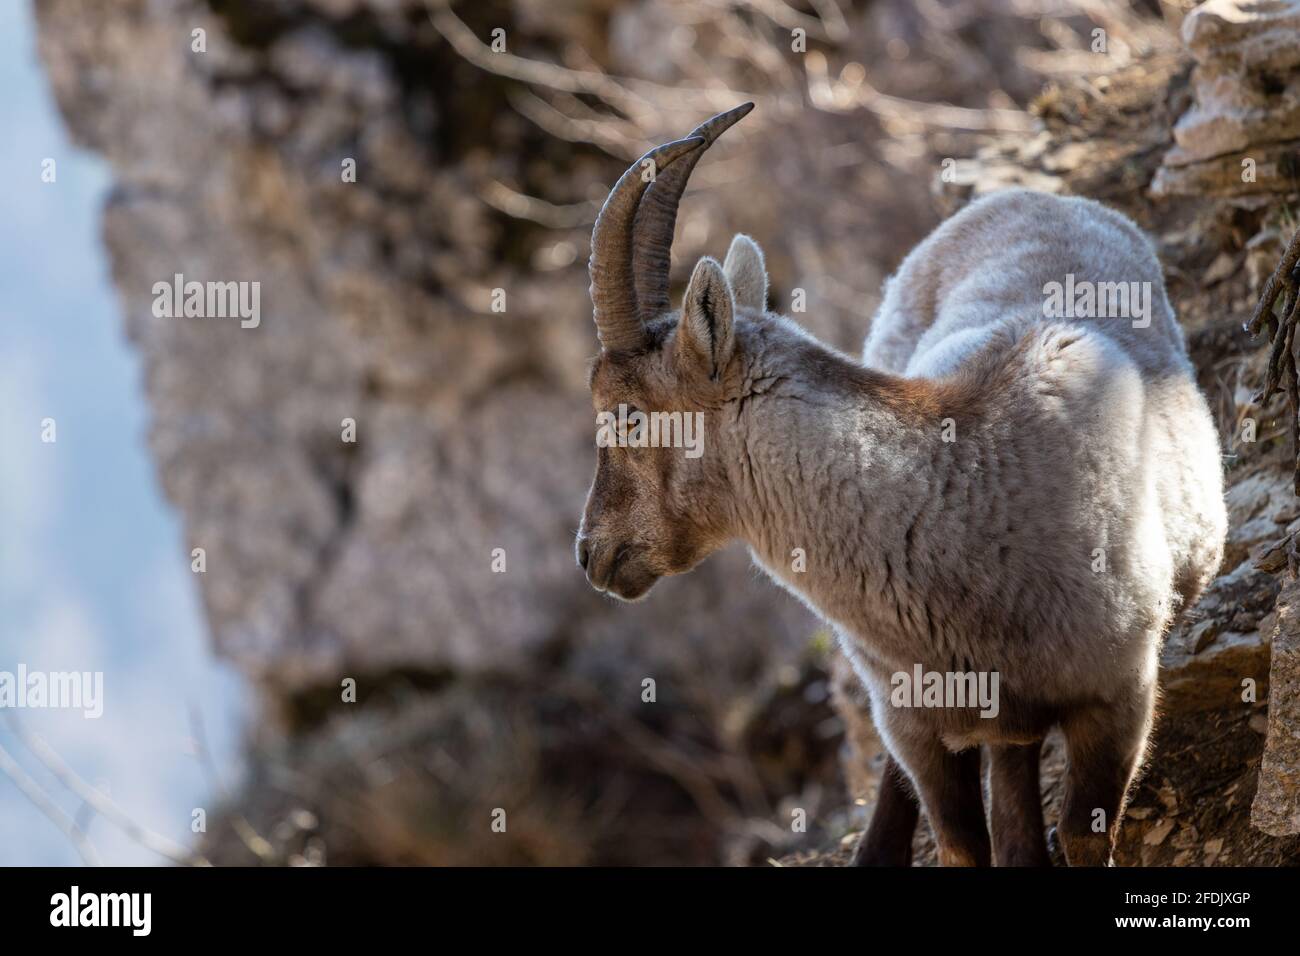 Alpine ibex Capra ibex on the rocks. It is also known as steinbock or bouquetin. Stock Photo